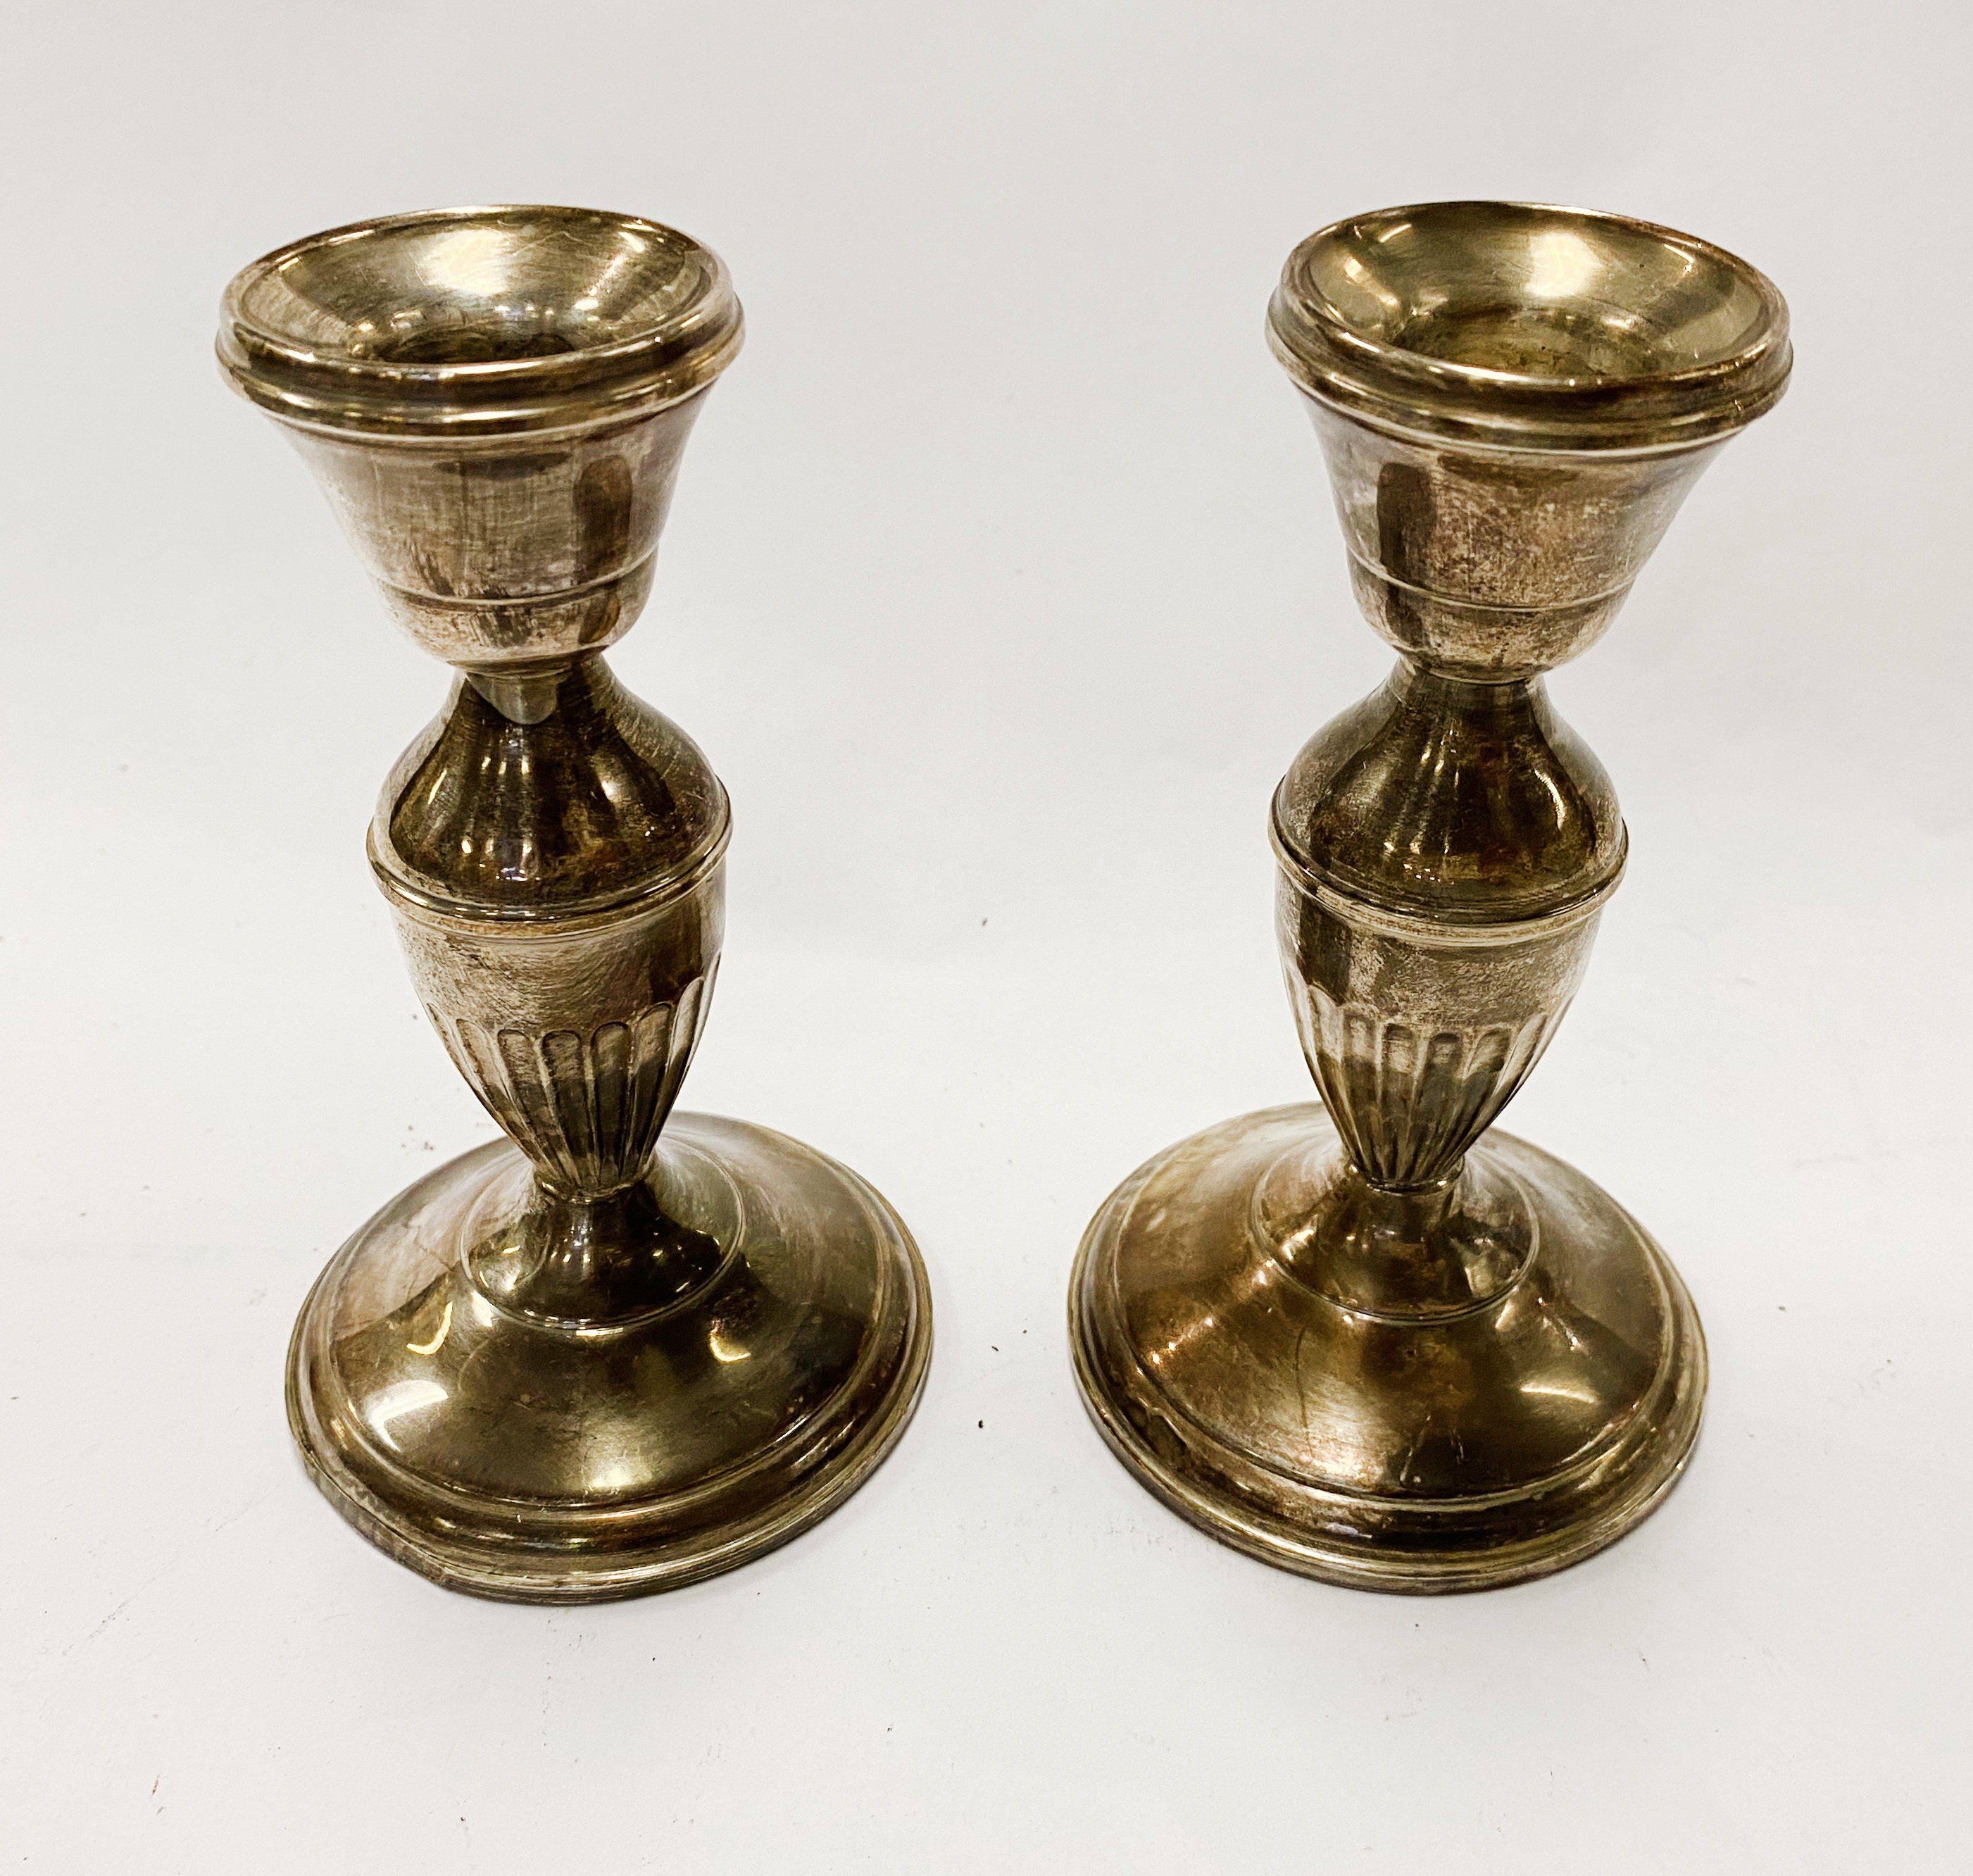 PAIR OF SILVER CANDLESTICKS 12CMS (H) APPROX